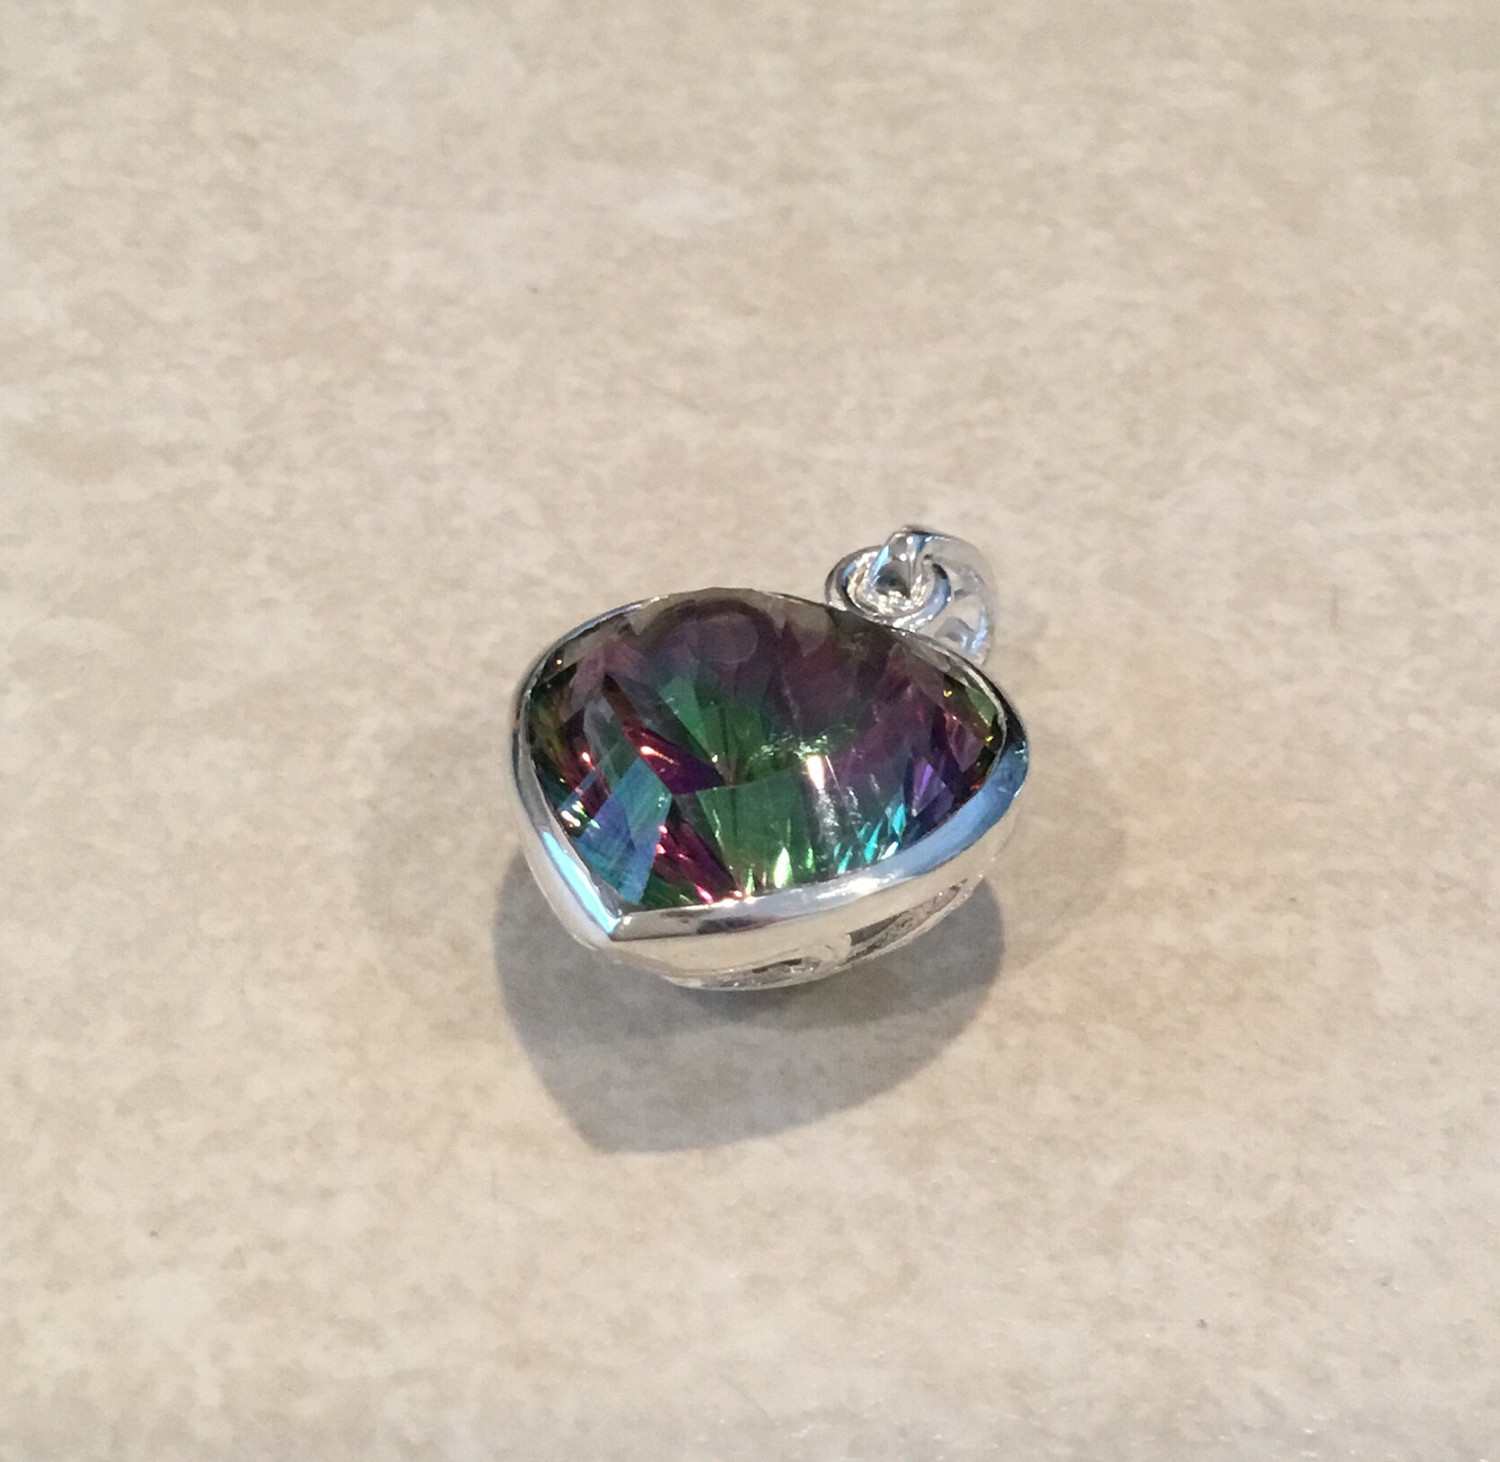 Handmade Sterling Silver Heart With Mystic Topaz 